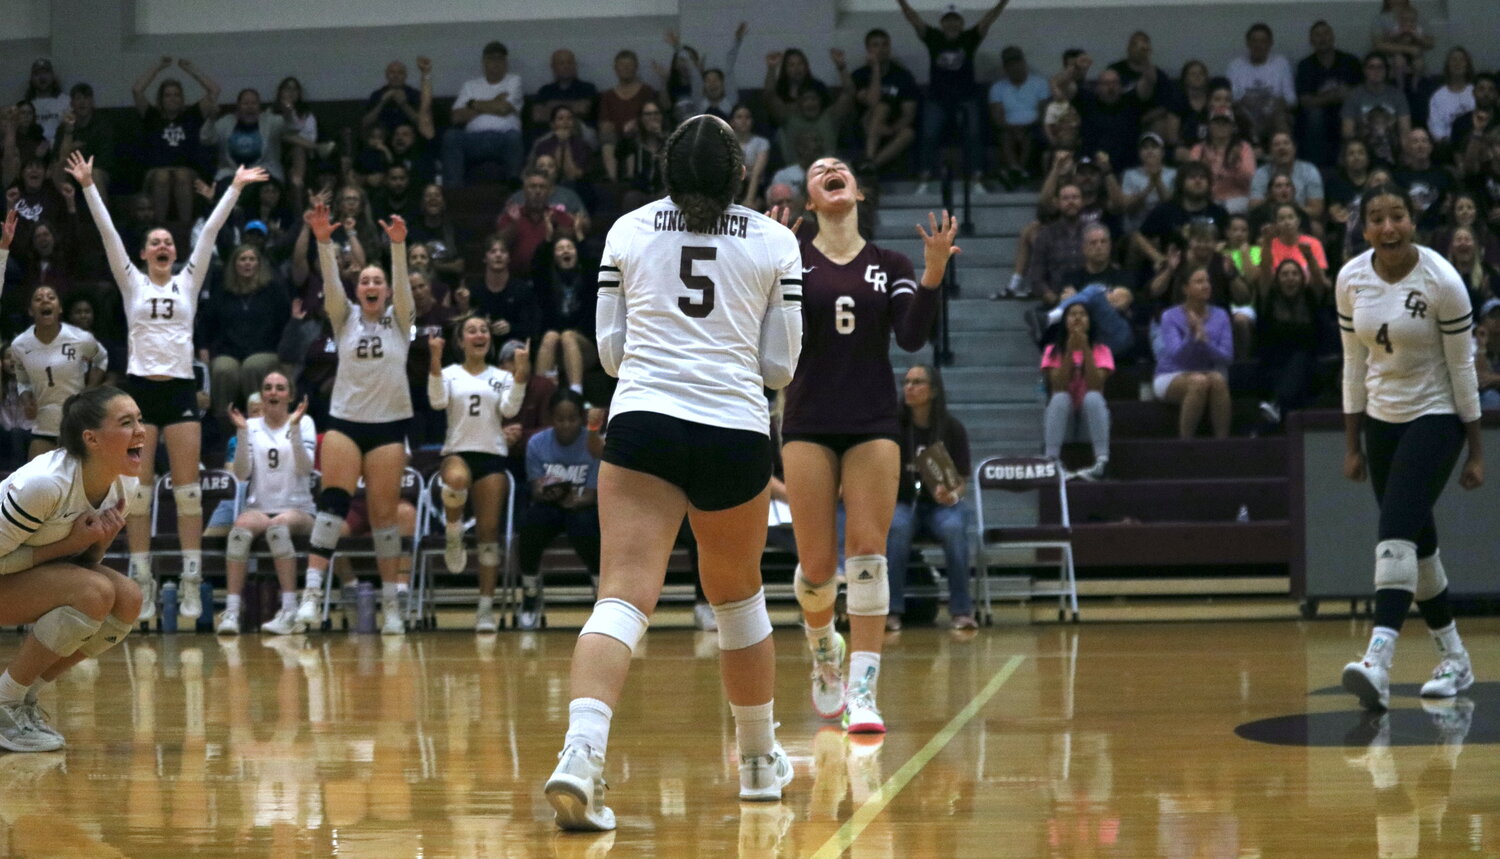 Cinco Ranch players celebrate after winning a set during Tuesday’s match between Cinco ranch and Seven Lakes at the Cinco Ranch gym.